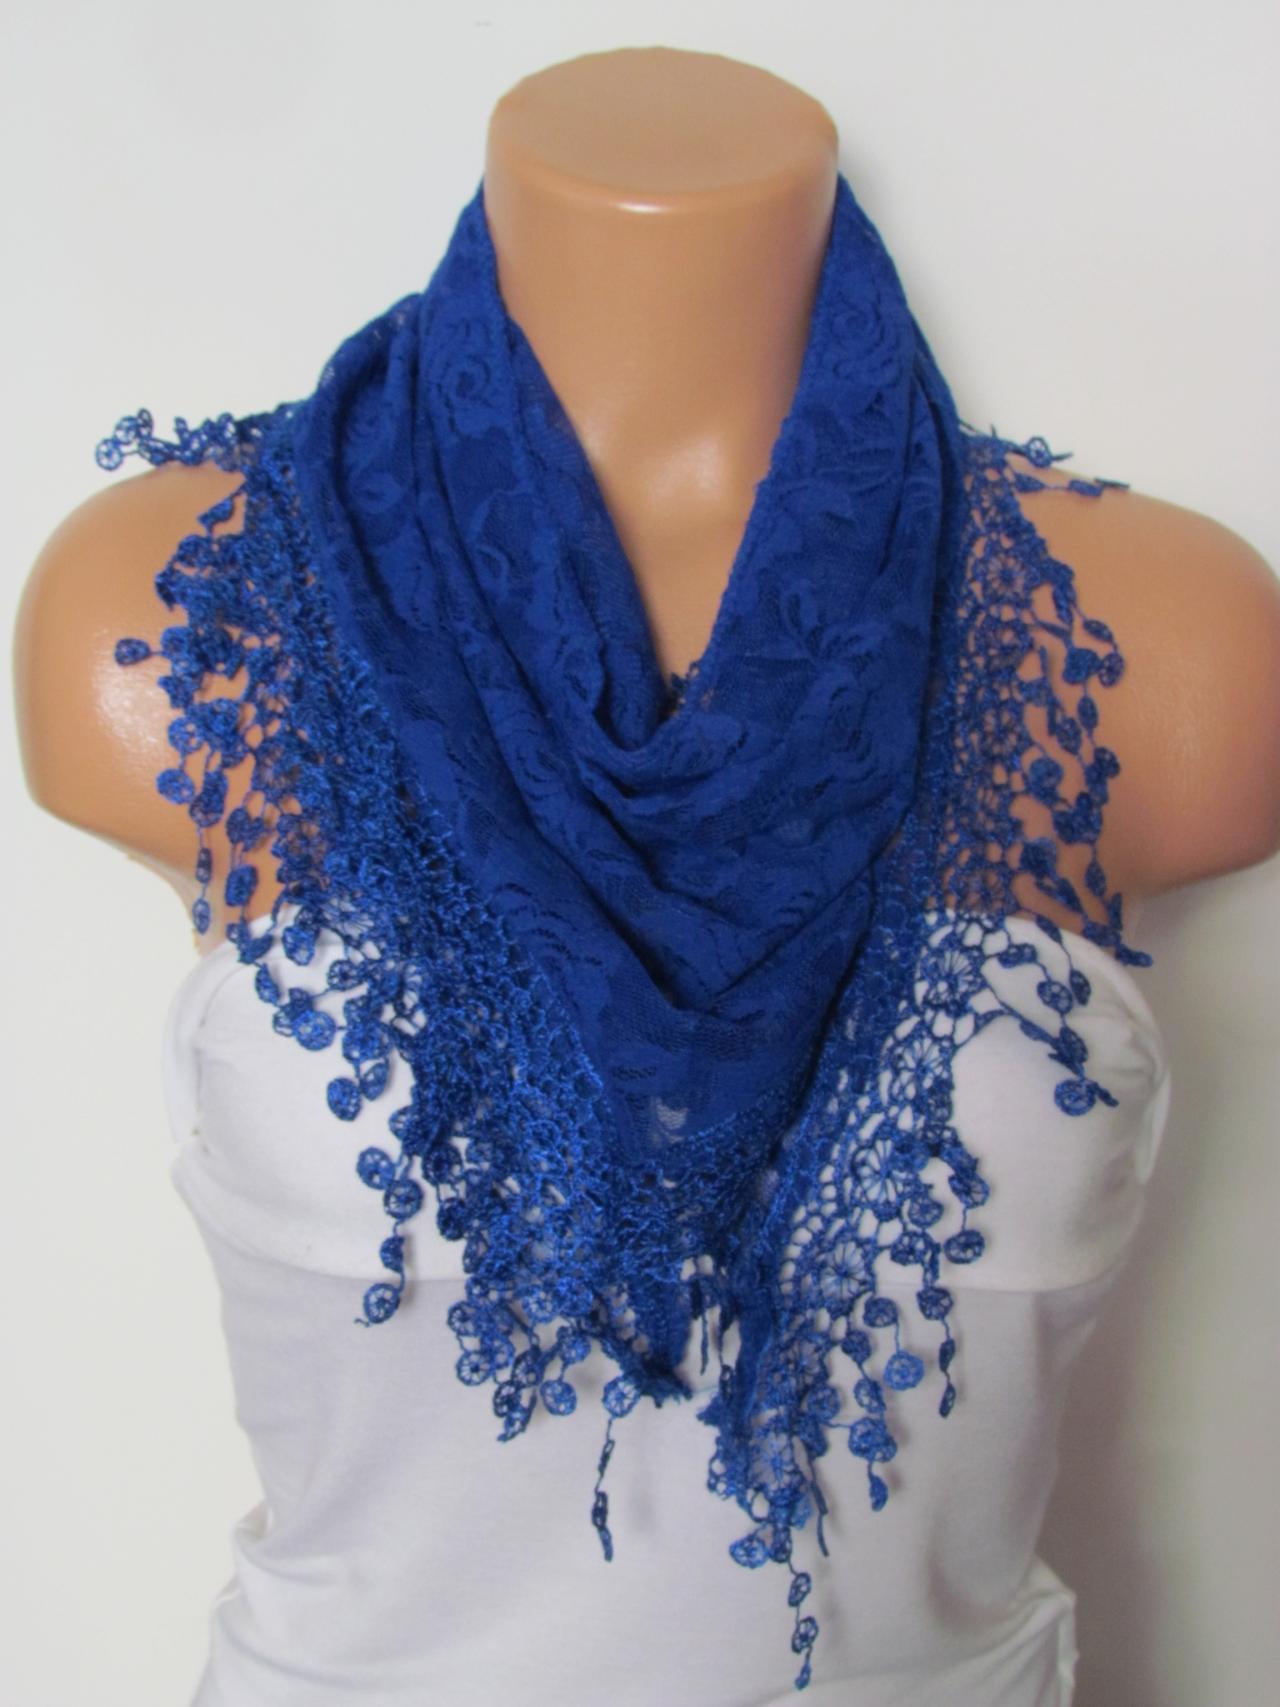 Royal Blue Long Scarf With Fringe-Winter Fashion Scarf-Headband-Necklace- Infinity Scarf- Winter Accessory-Long Scarf